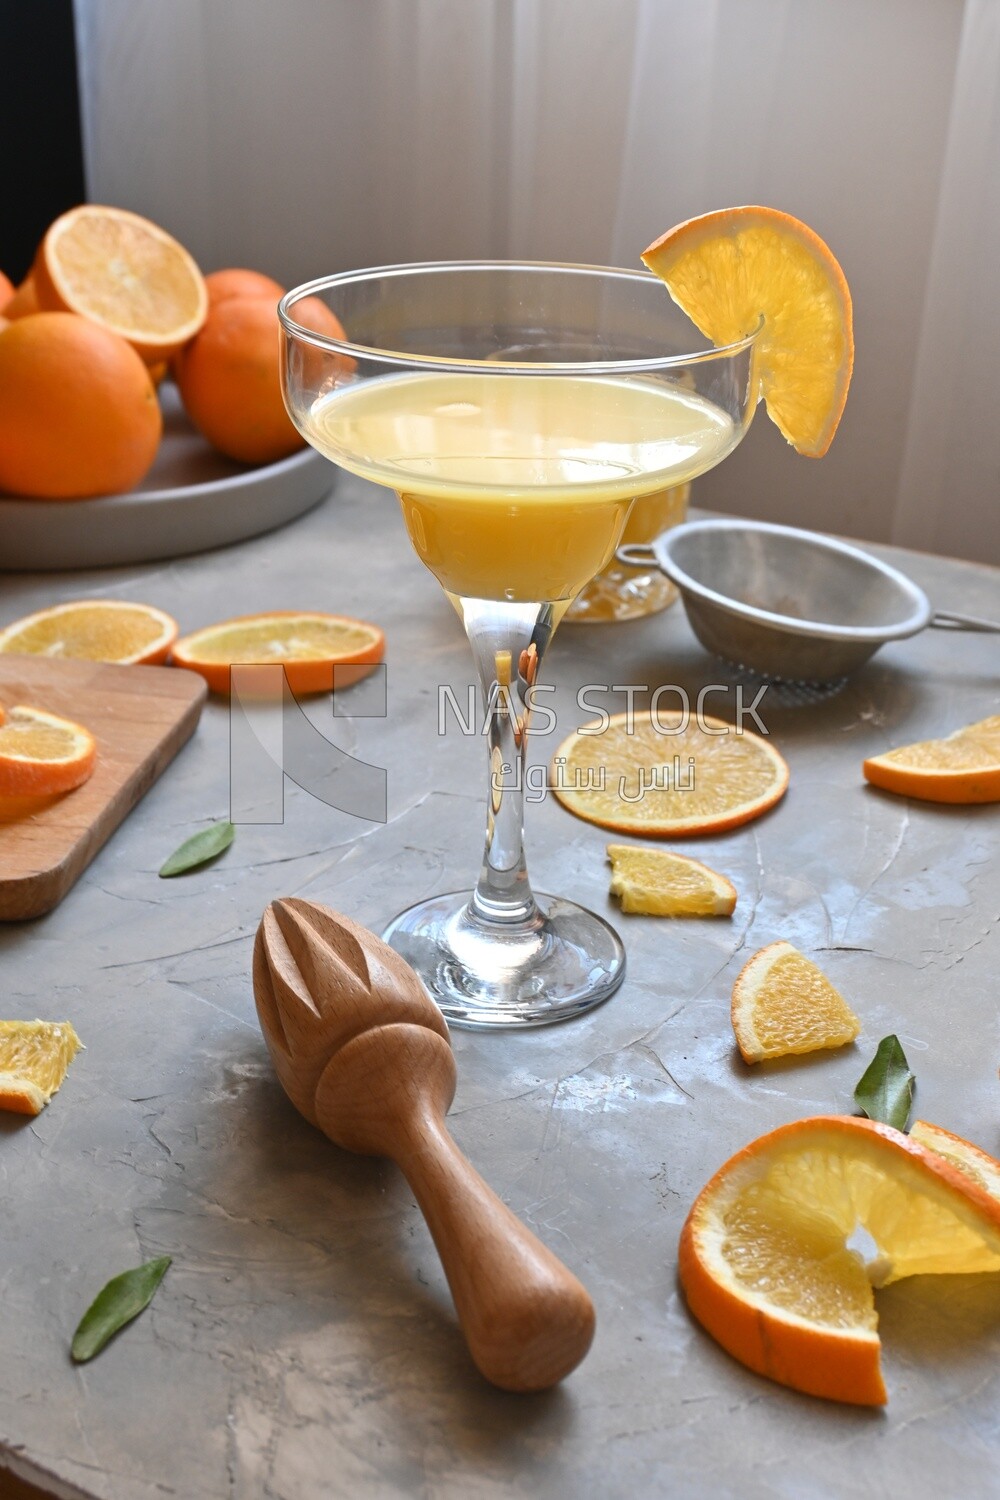 Glass of orange juice with a wooden citrus juicer